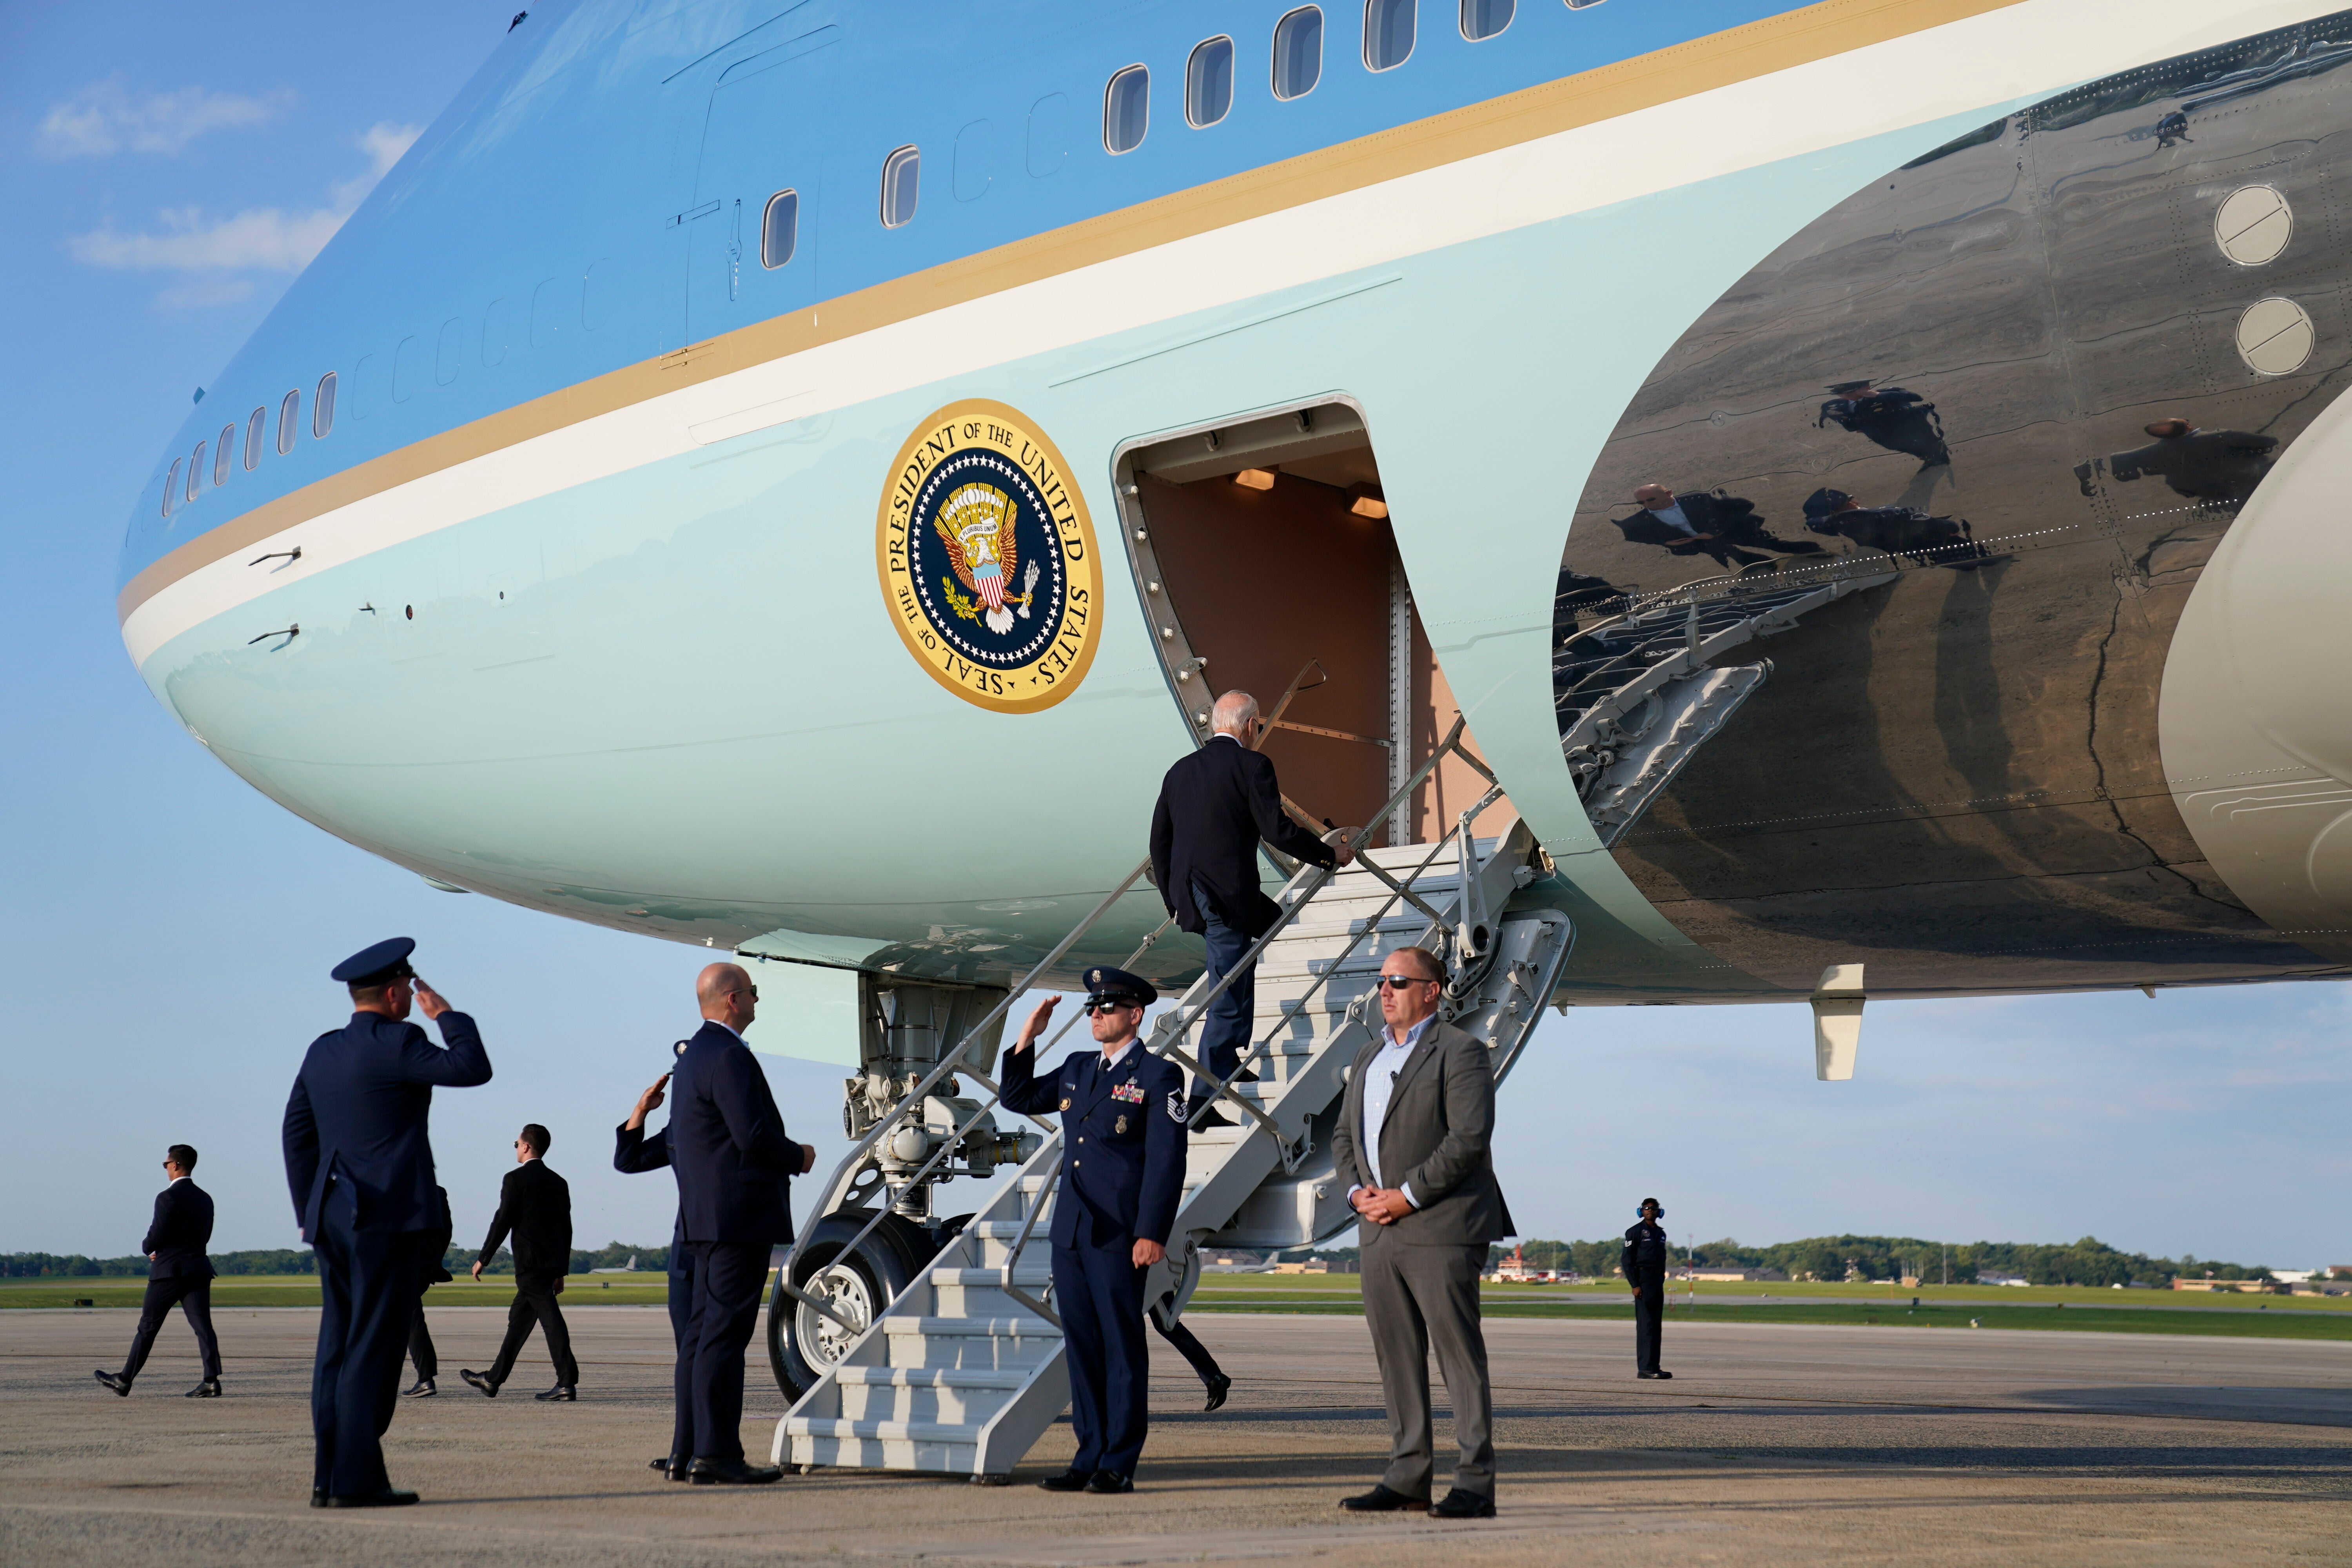 Joe Biden has been using the shorter stairs to Air Force One more often